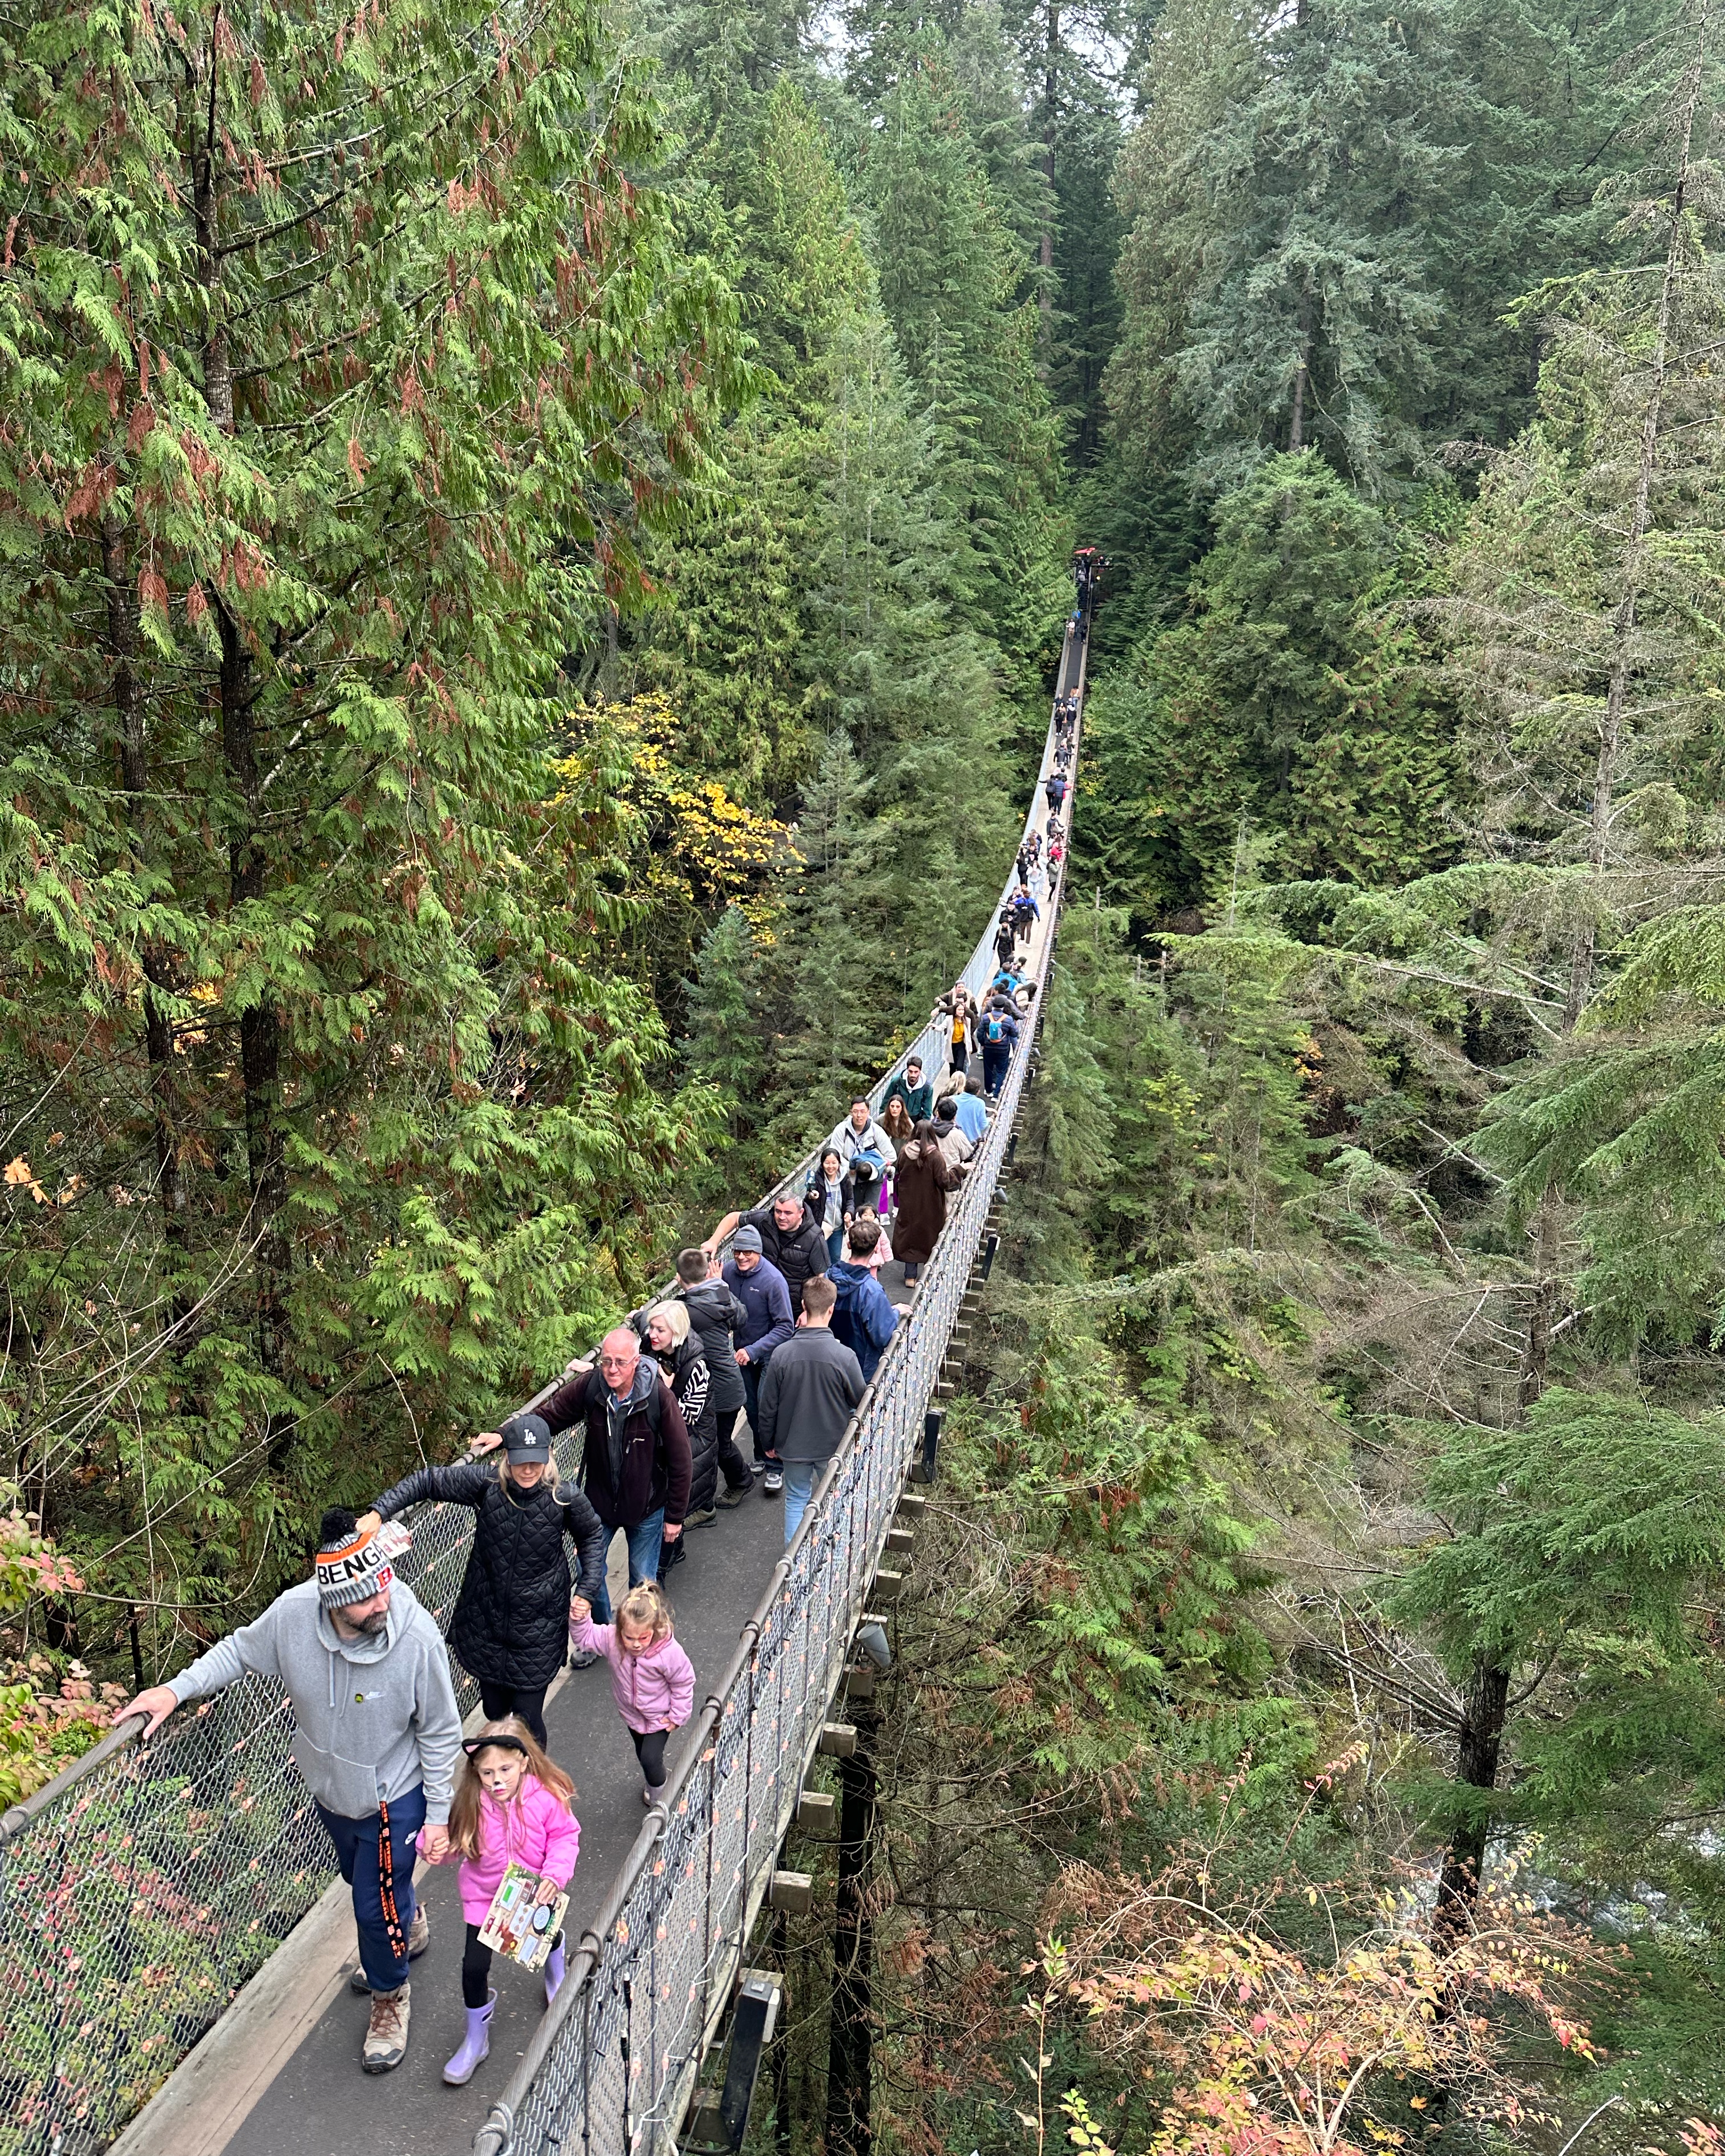 Things to do in Vancouver Capilano Suspension Bridge Park